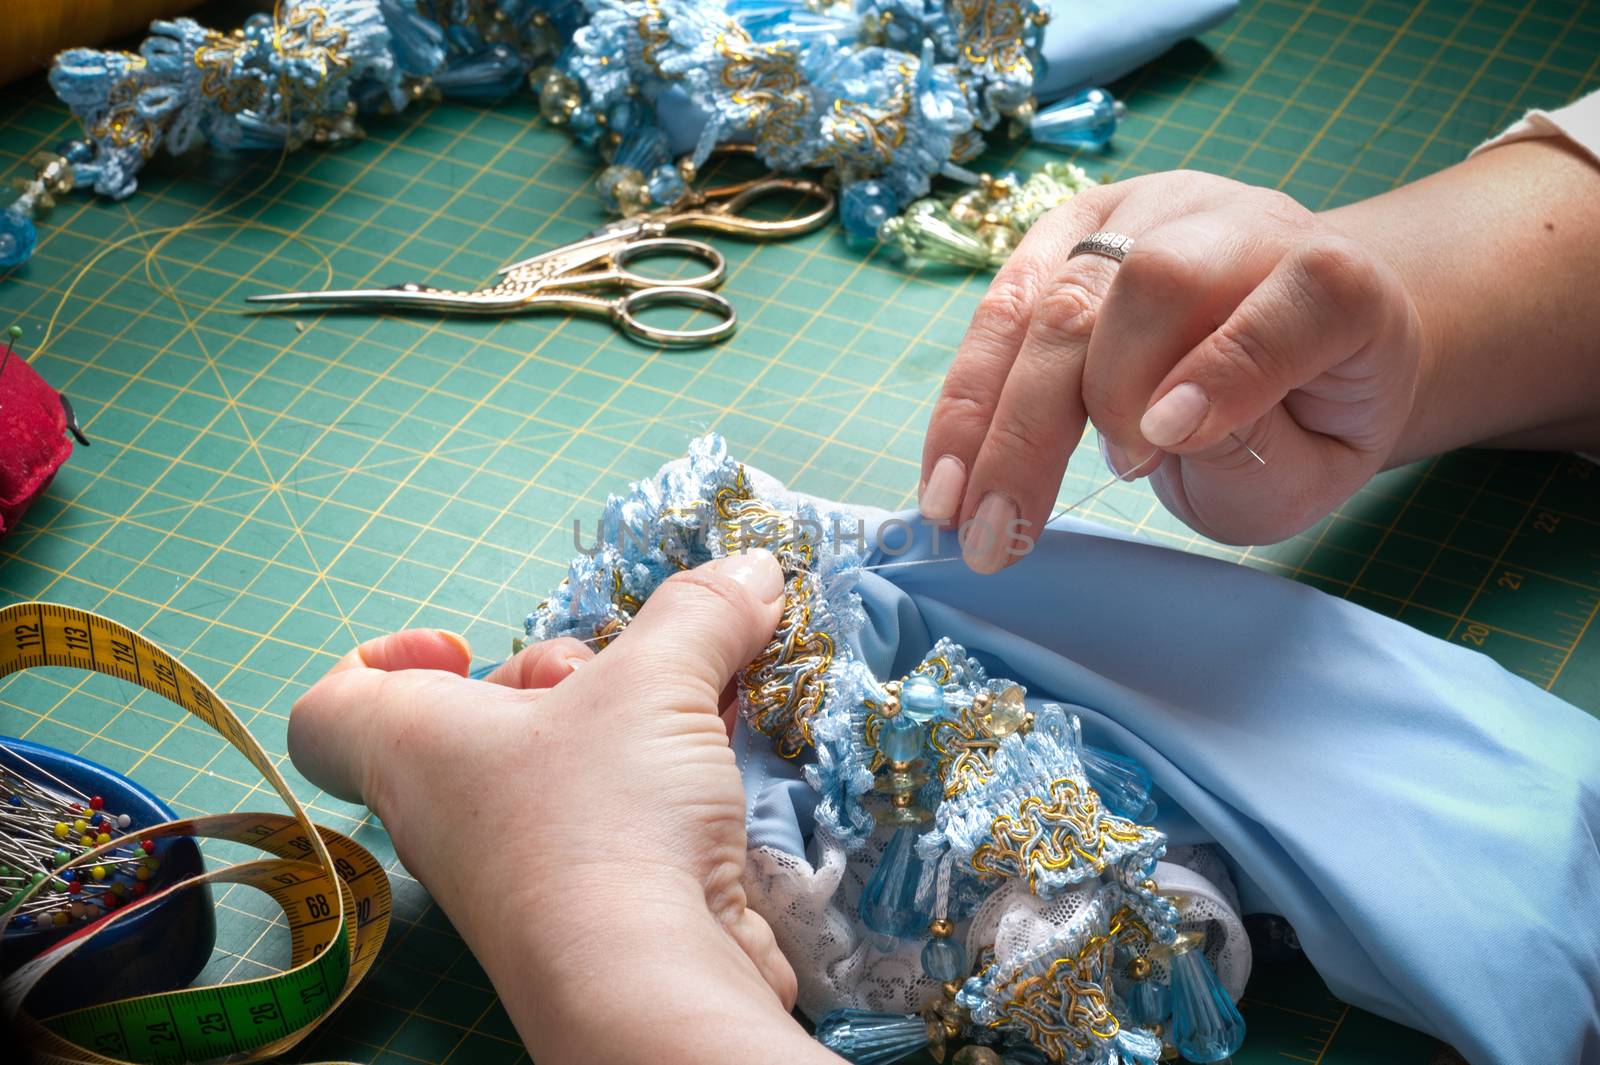 A woman sews a decorative element to clothes with a needle